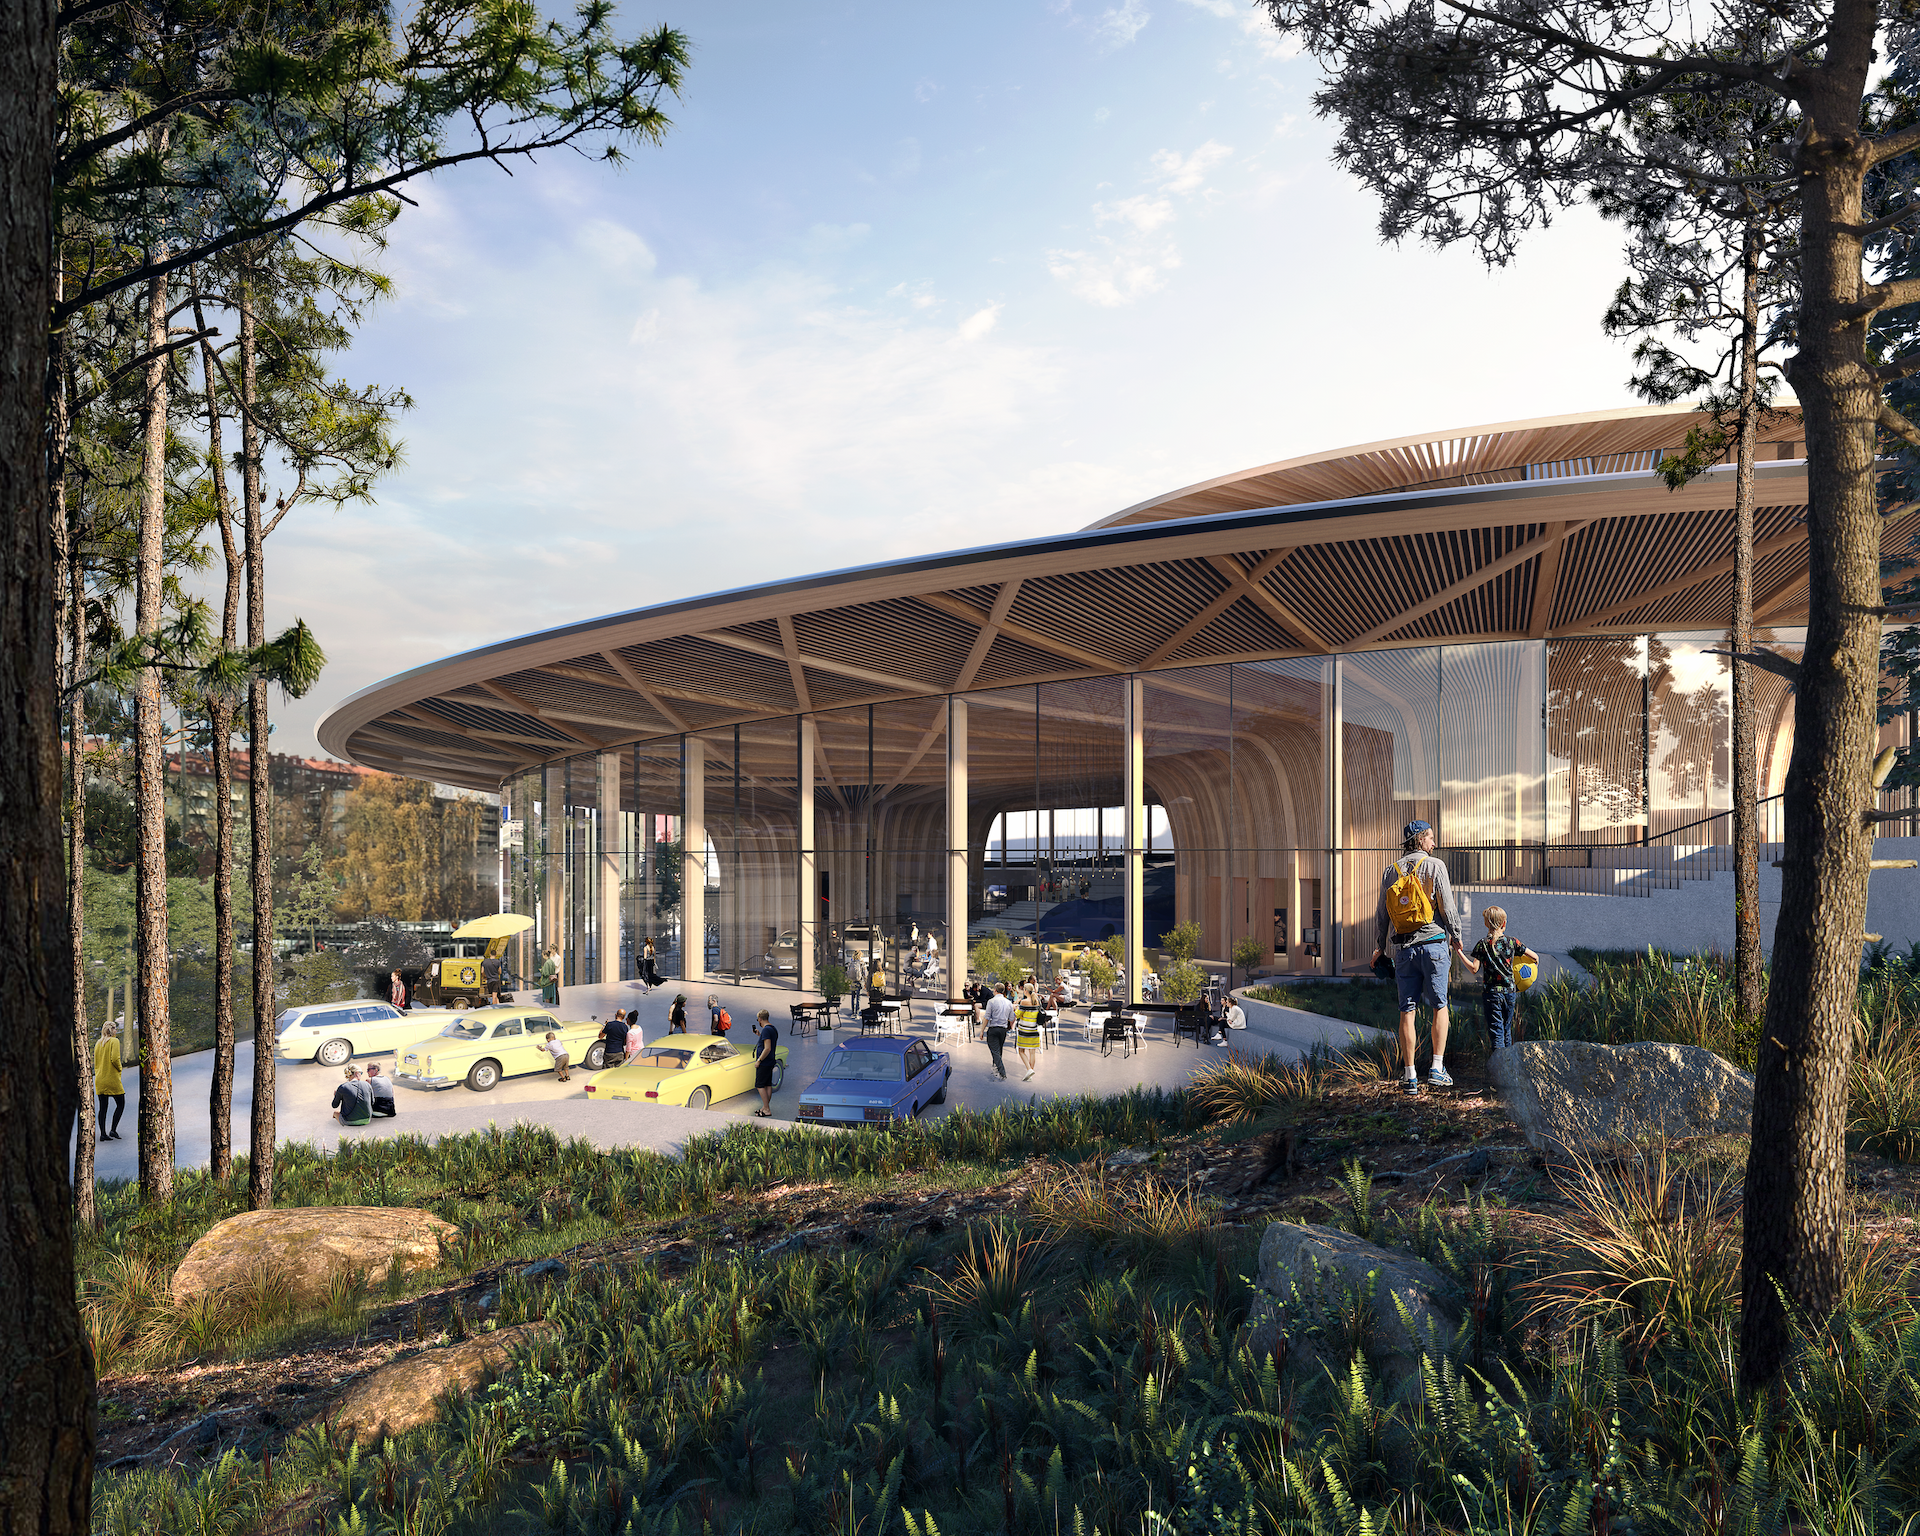 World of Volvo event space. Located in
Gothenburg’s event district, the 22,000 m2
timber building is expected to be completed
in late 2023.